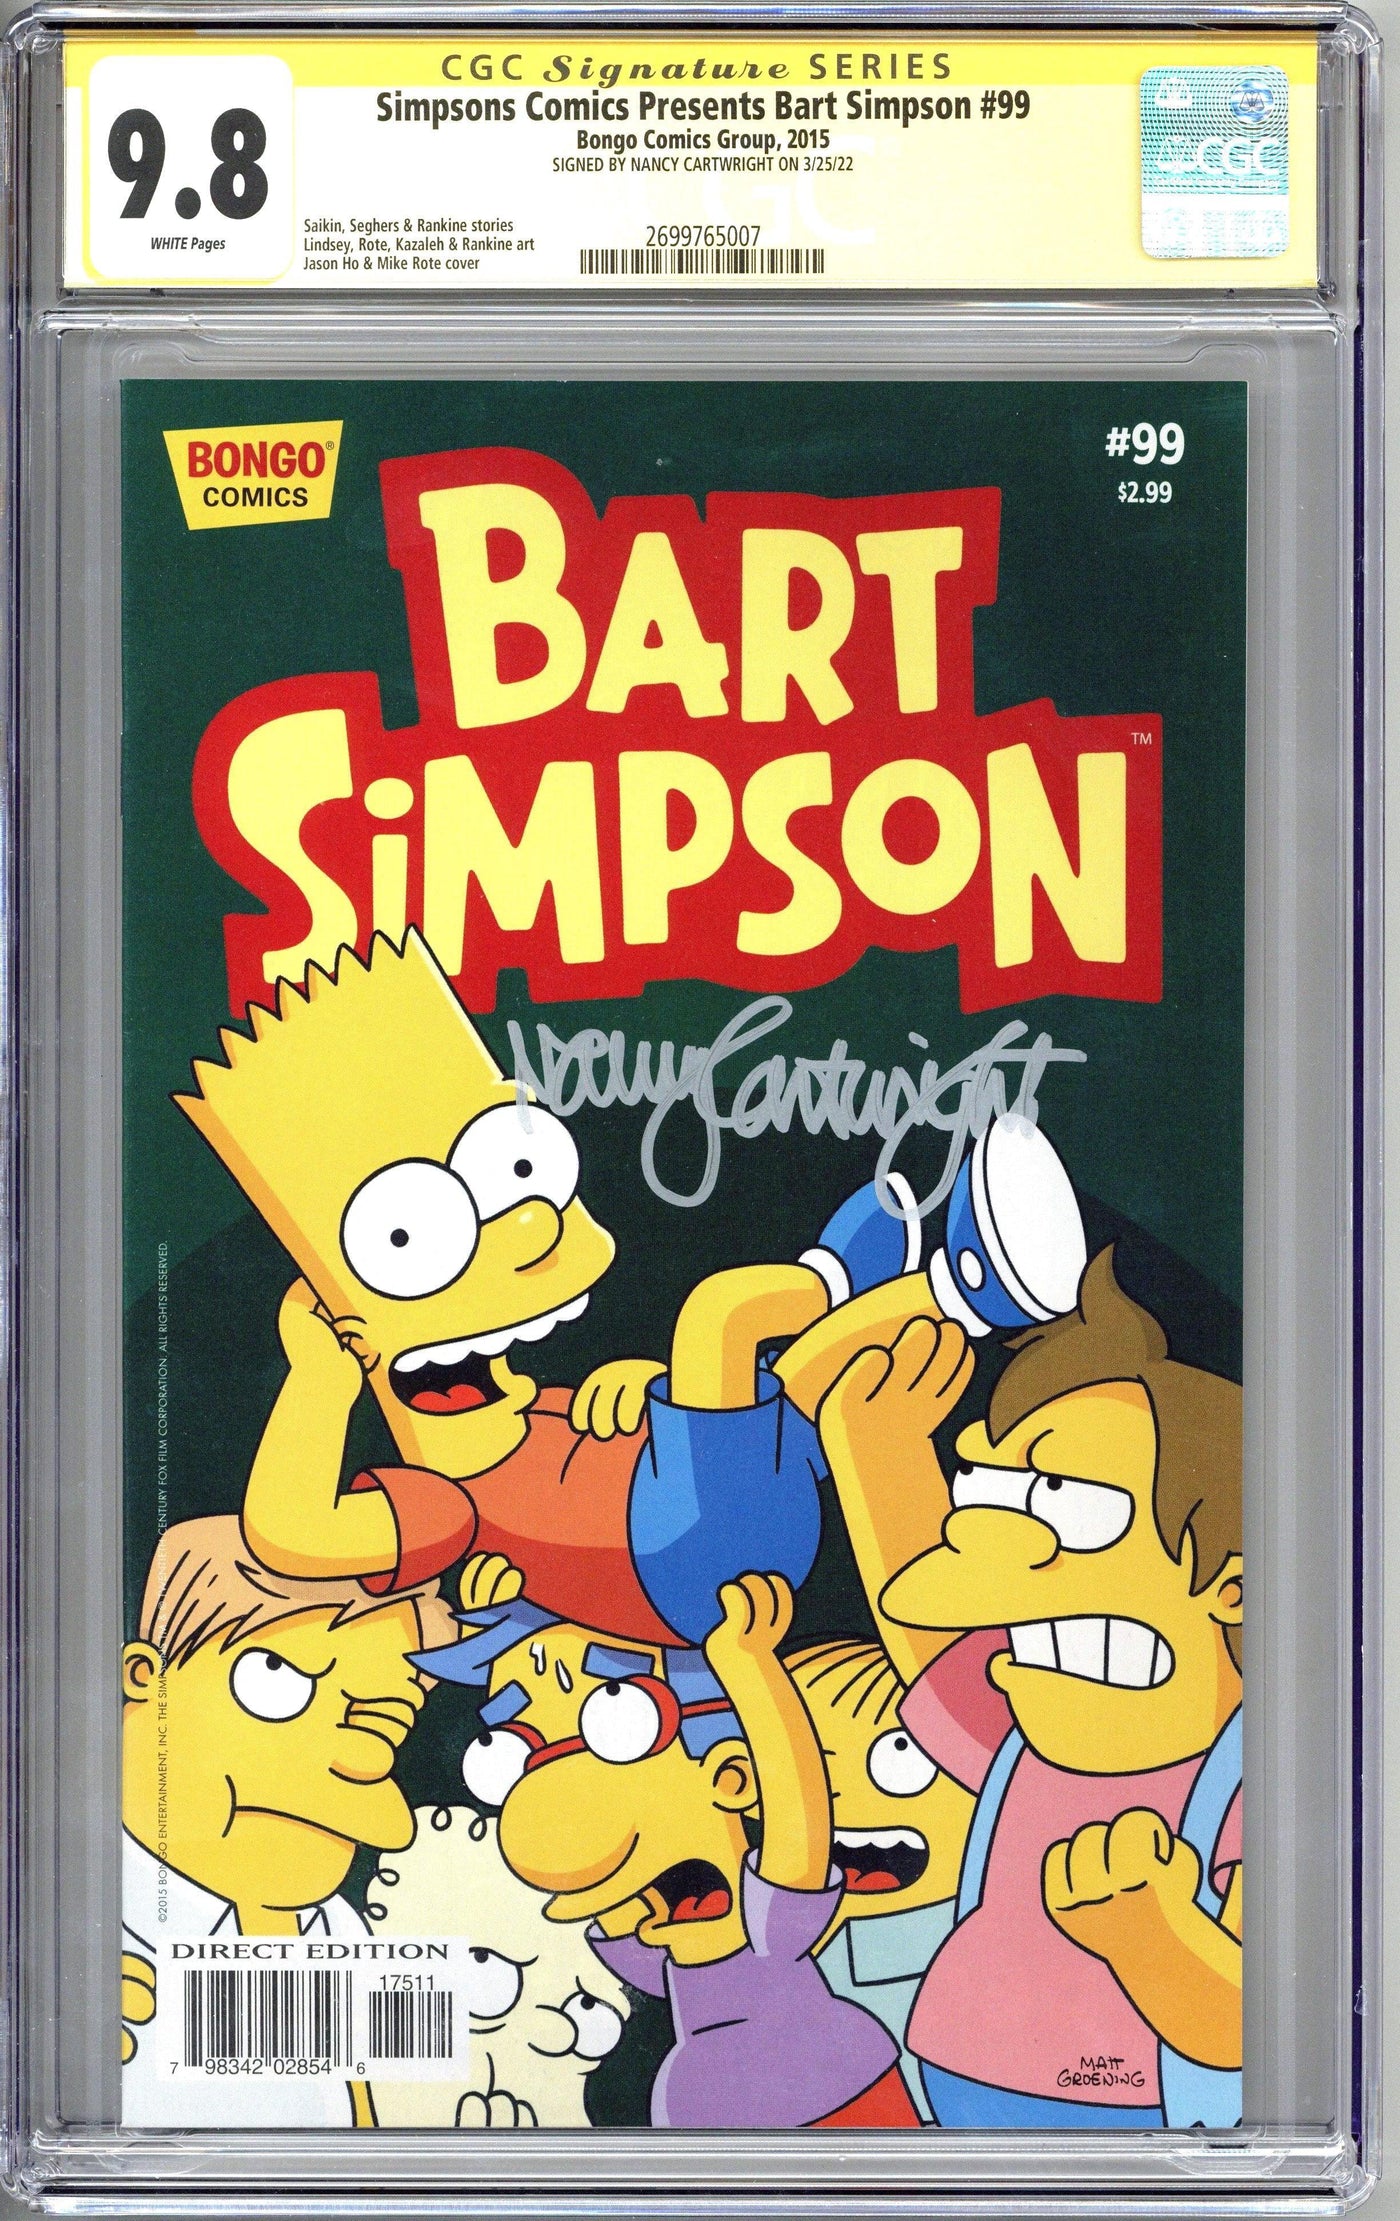 Nancy Cartwright Signed Bart Simpson Comic Book CGC 9.8 Autographed